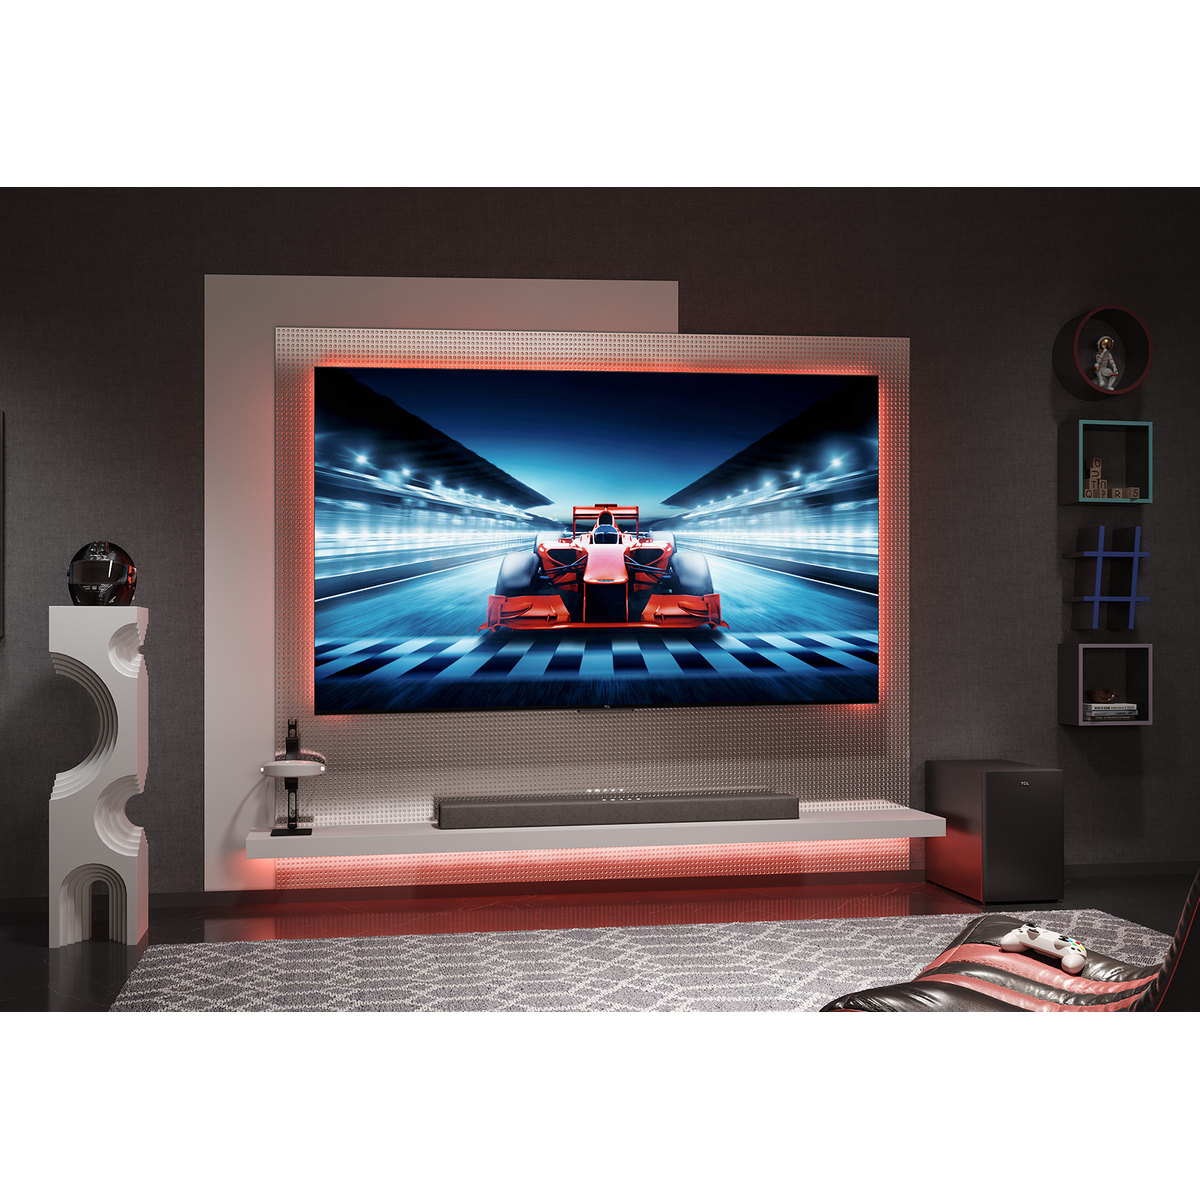 55-inch QLED Television